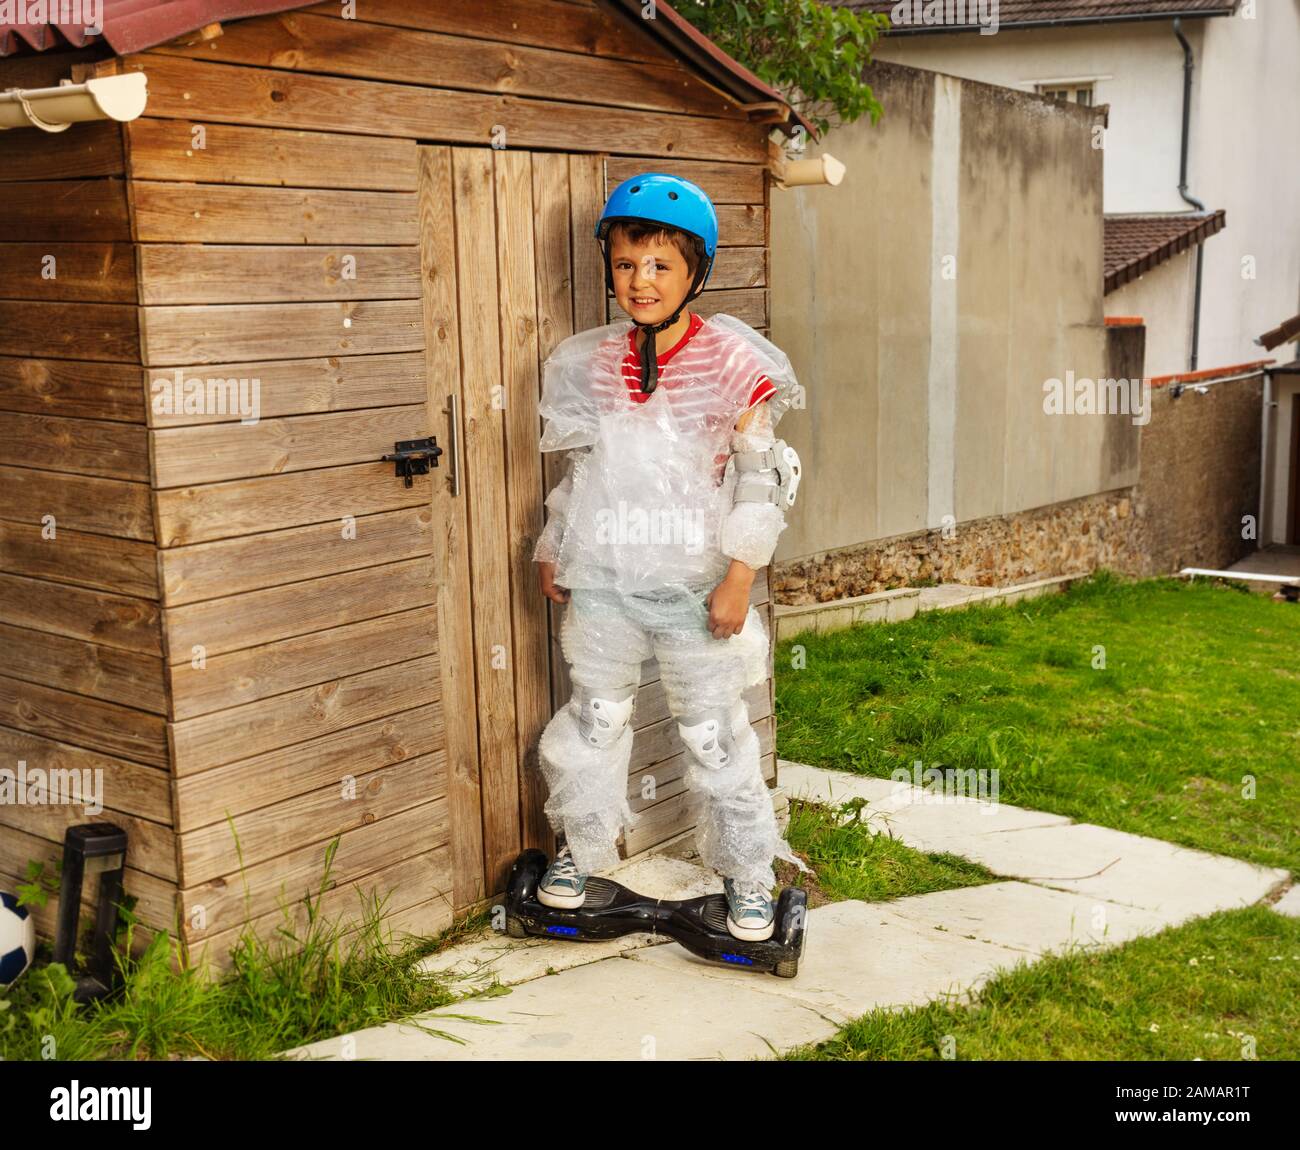 Boy ride a gyro scooter wrapped in overprotective bubble wrap and wearing helmet in the garden Stock Photo